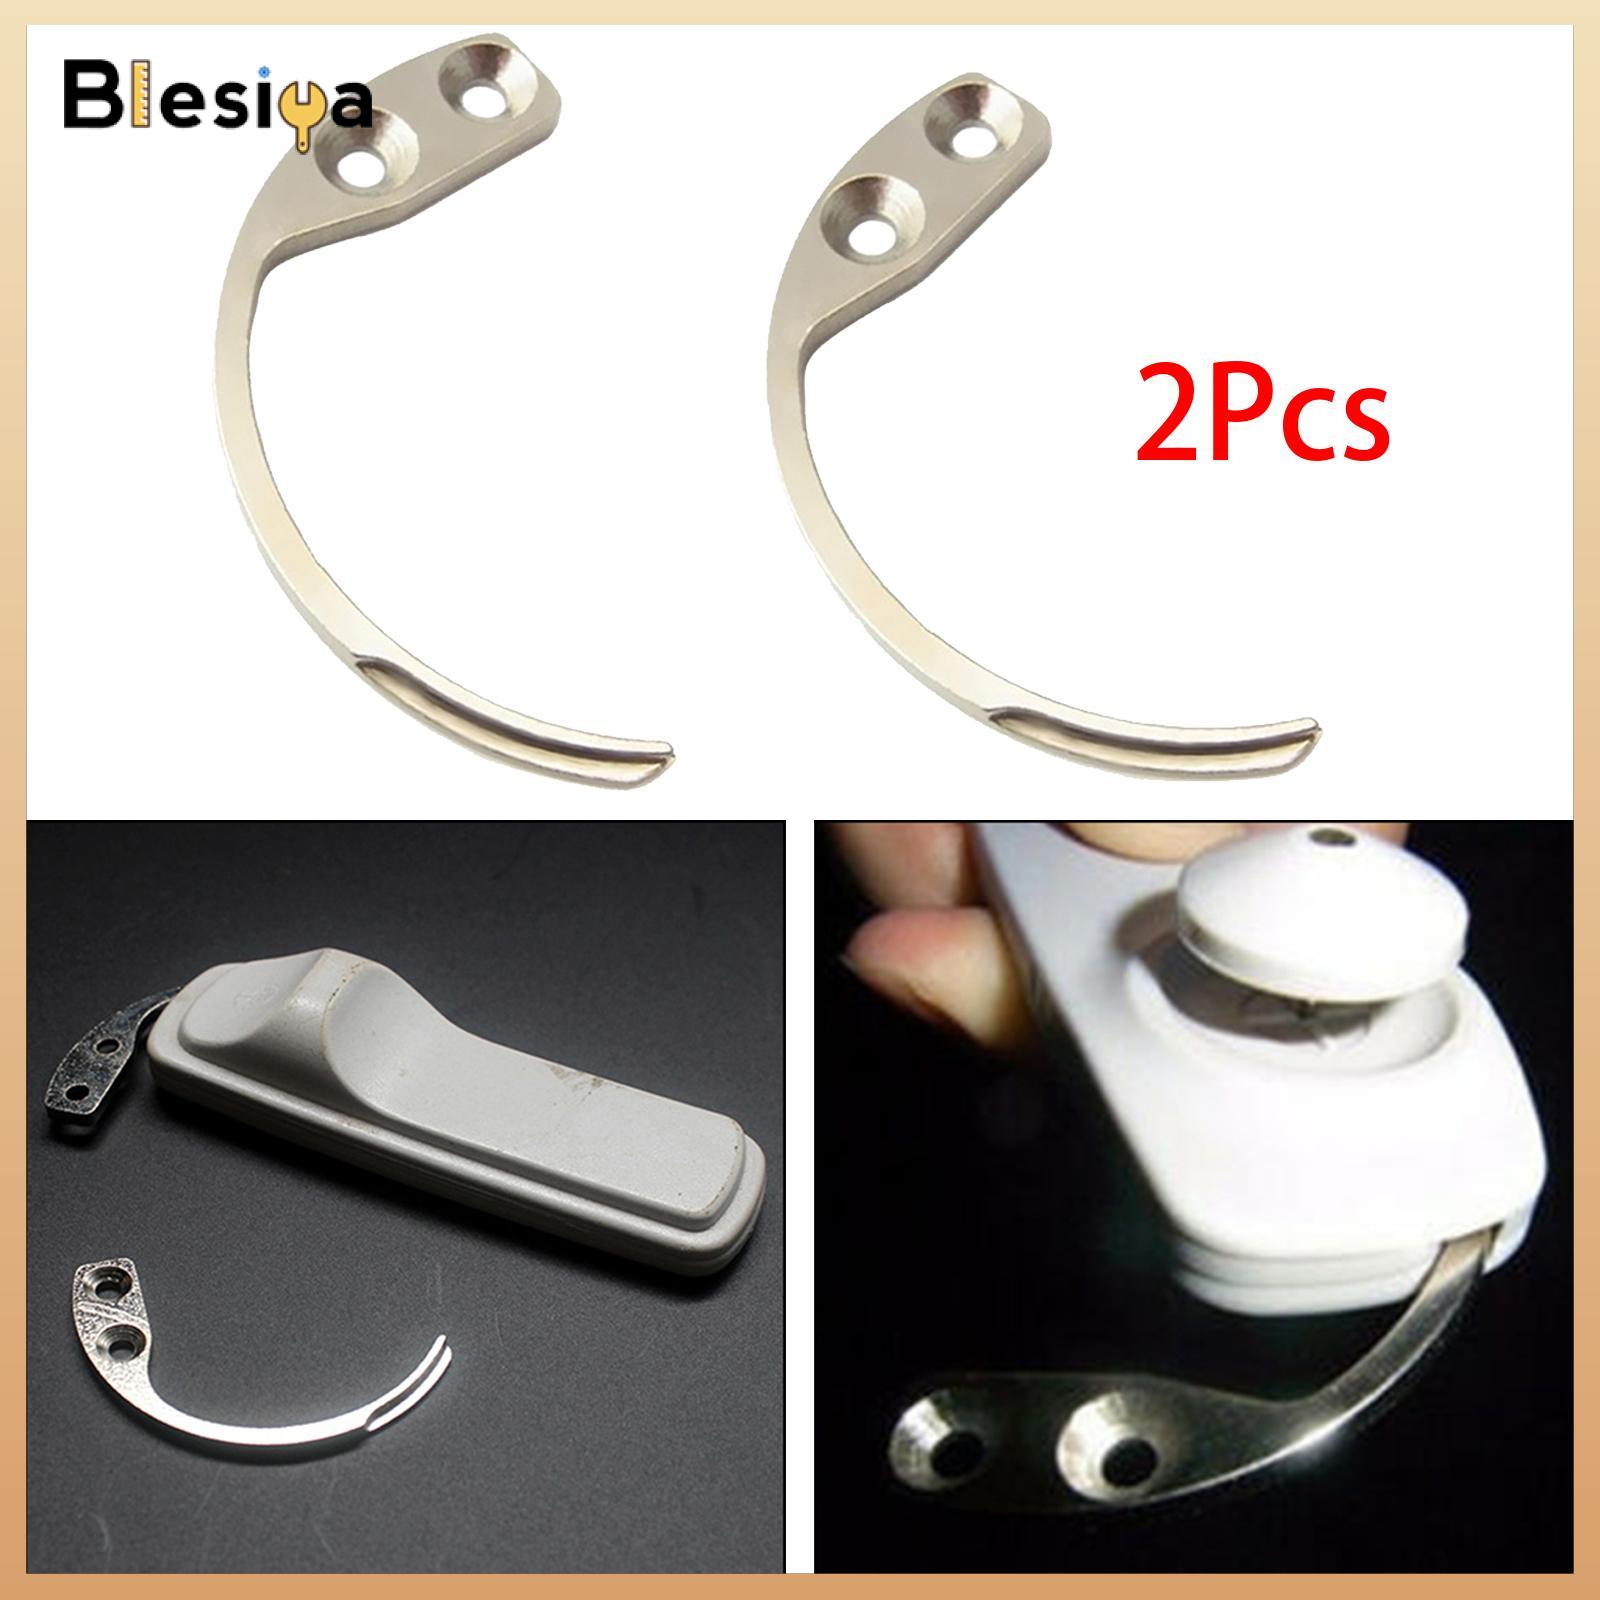 Blesiya 2 Pieces Detacher Hooks Eas tags for Slipper Shoes Security Tags